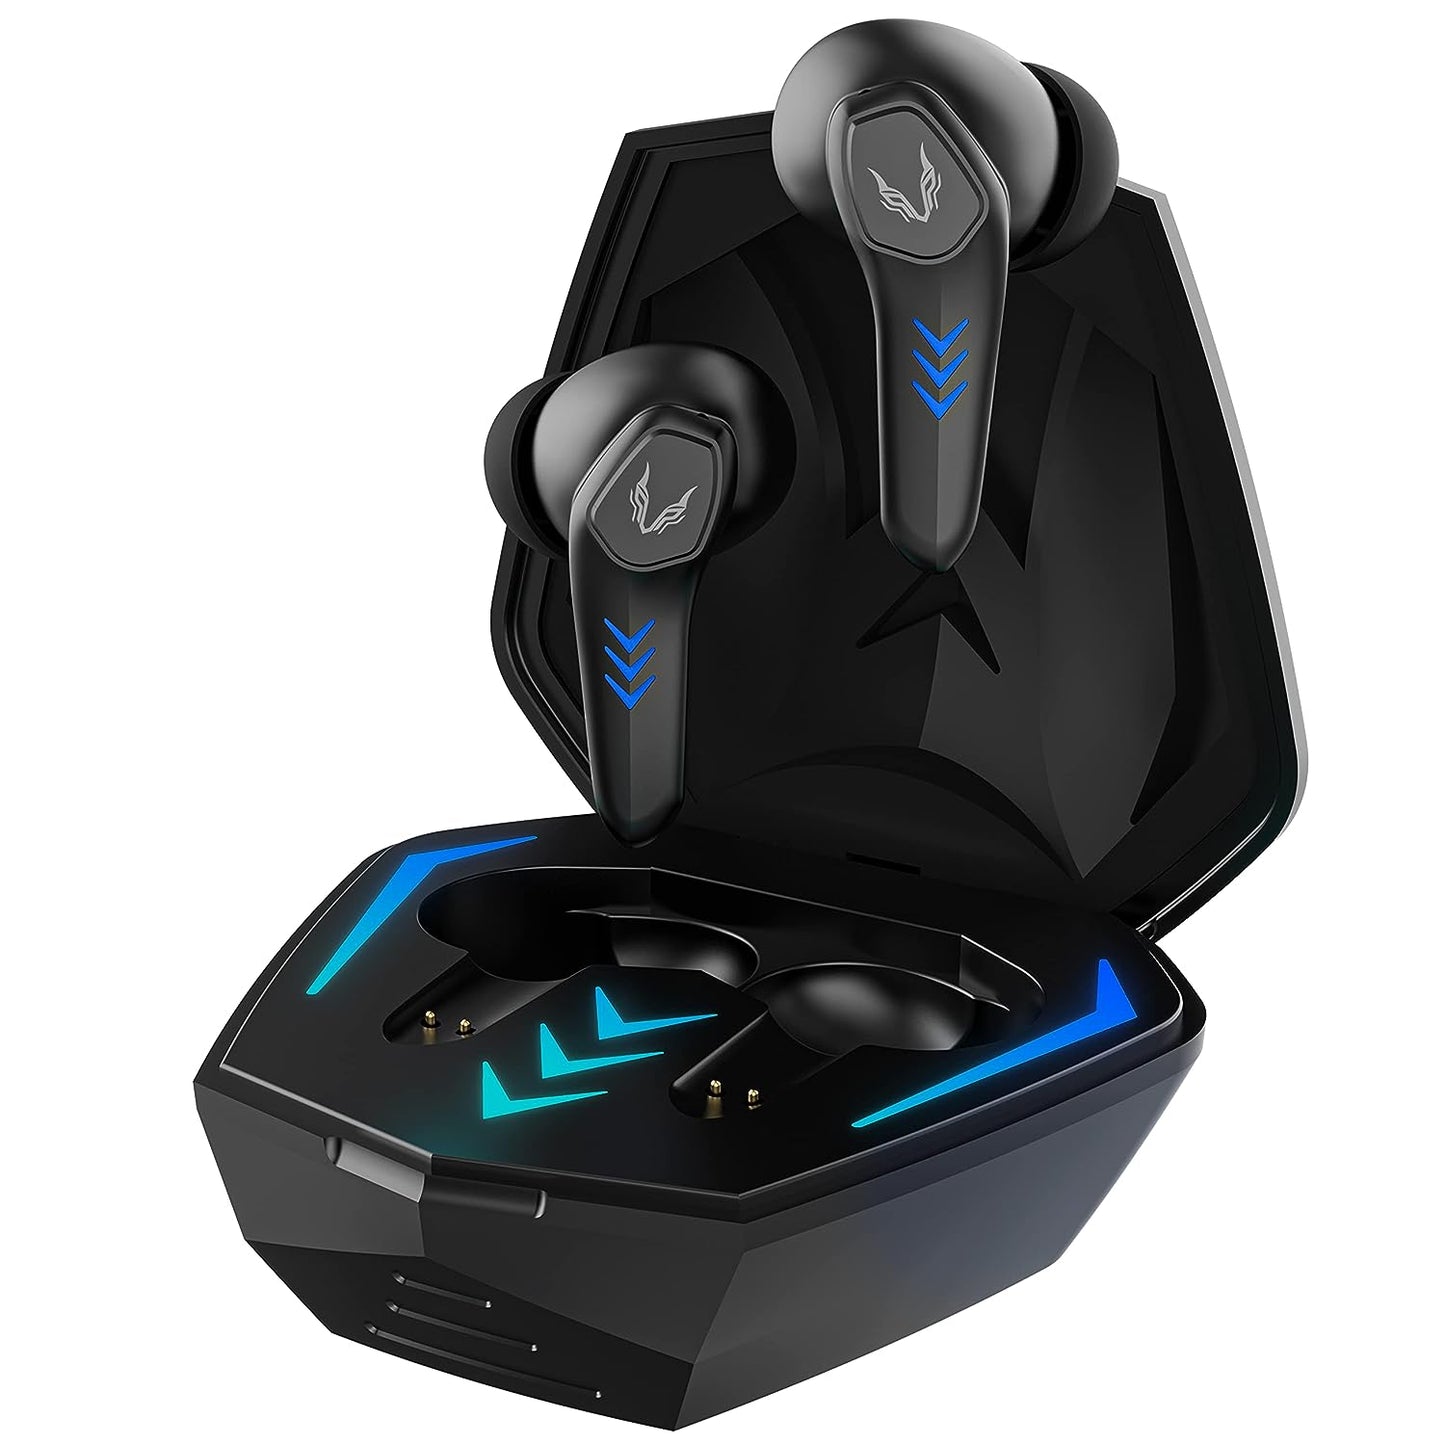 (Without Box) TAGG Rogue 100Gt Bluetooth Truly Wireless Gaming in Ear Earbuds with 50Ms Low Latency for Better Gaming 20Hrs Playtime with Mic with Enc for Best Calling Made for Comfort Gaming